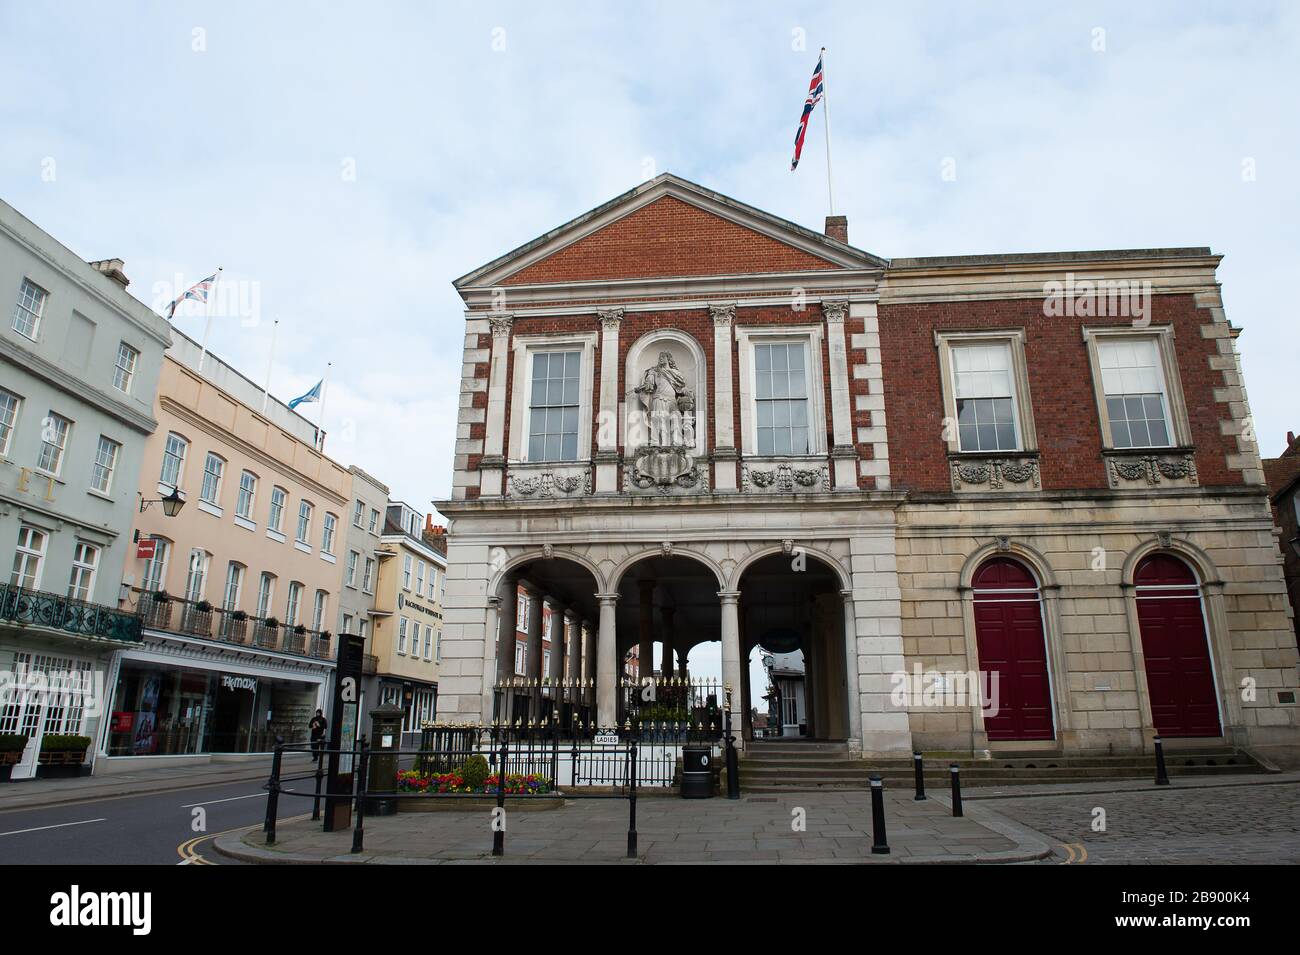 Windsor, Berkshire, UK. 22nd March, 2020. The Guildhall in Windsor is open for weddings and civil partnerships but only couples getting married, their witness and the registrars may attend due to the Coronavirus pandemic. Credit: Maureen McLean/Alamy Stock Photo